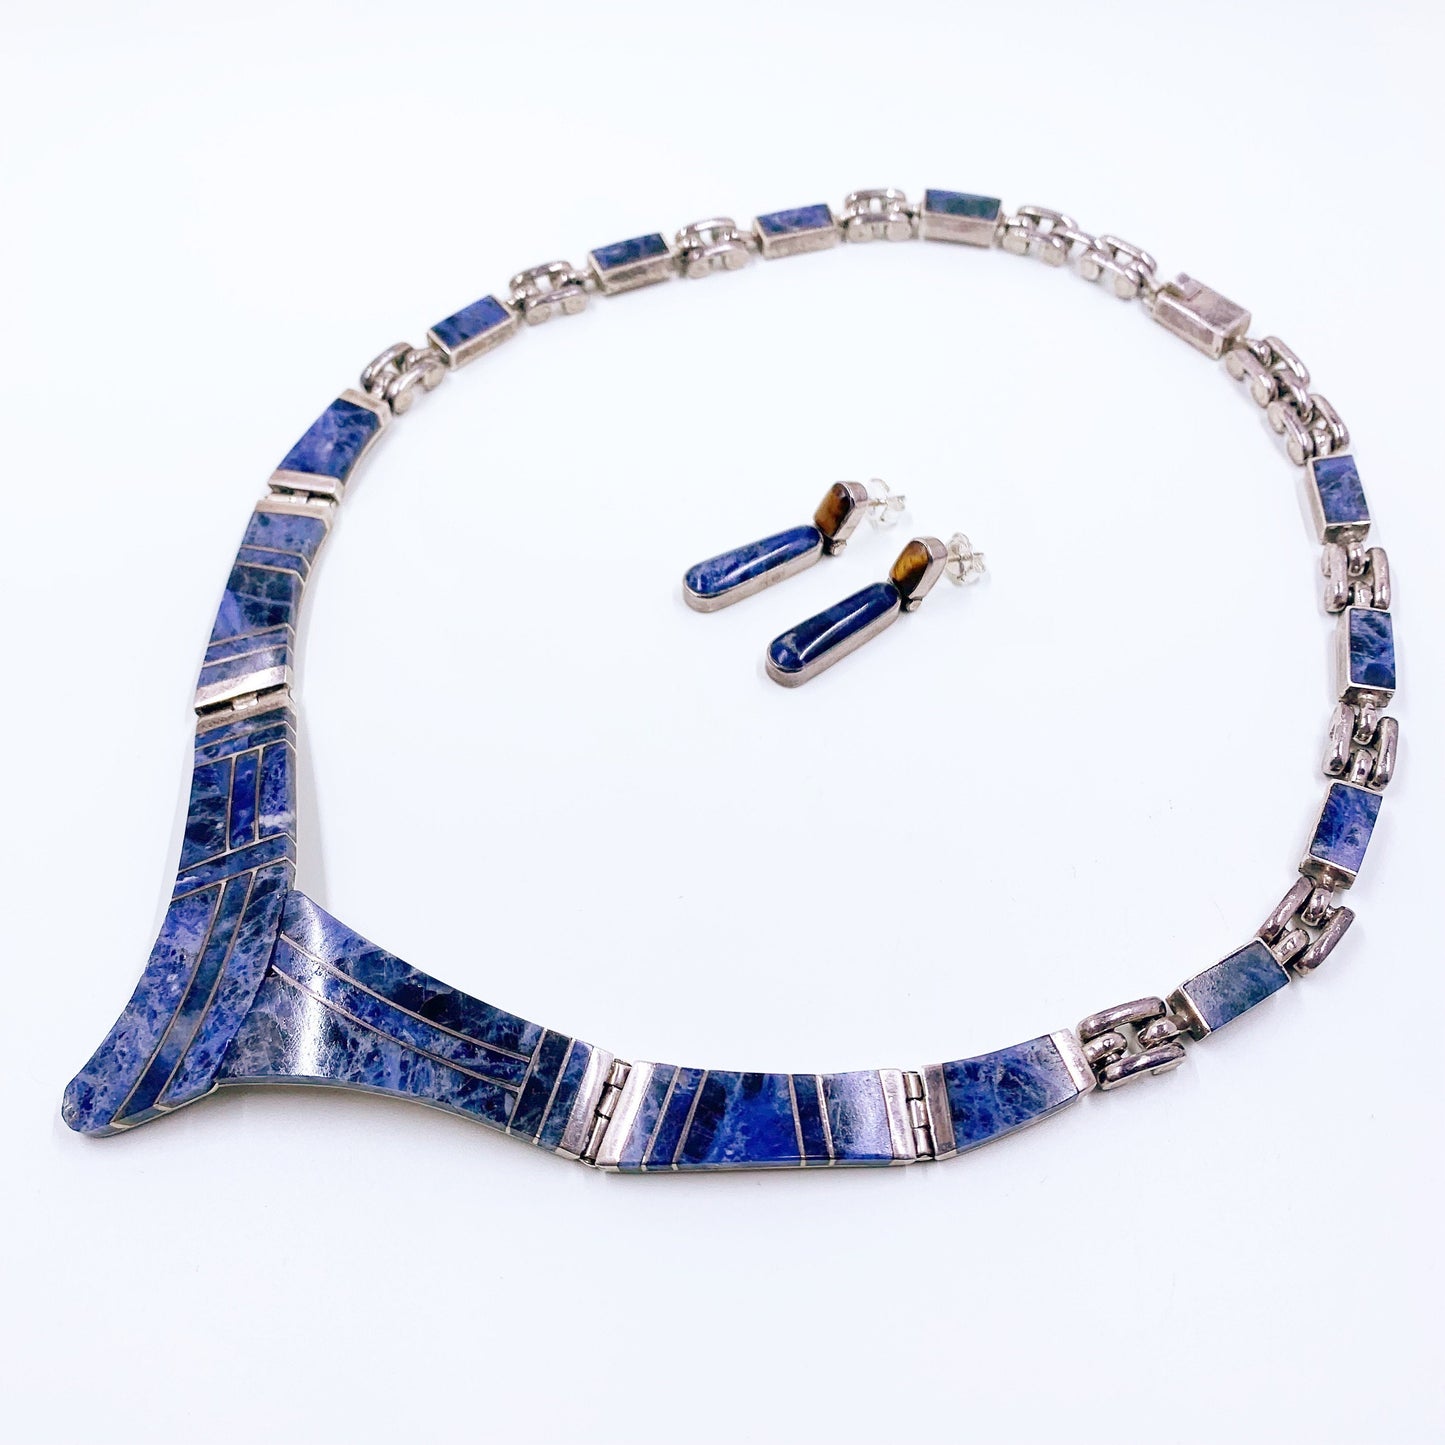 Vintage Mexican Silver Modernist Sodalite Collar Necklace and Earring Set